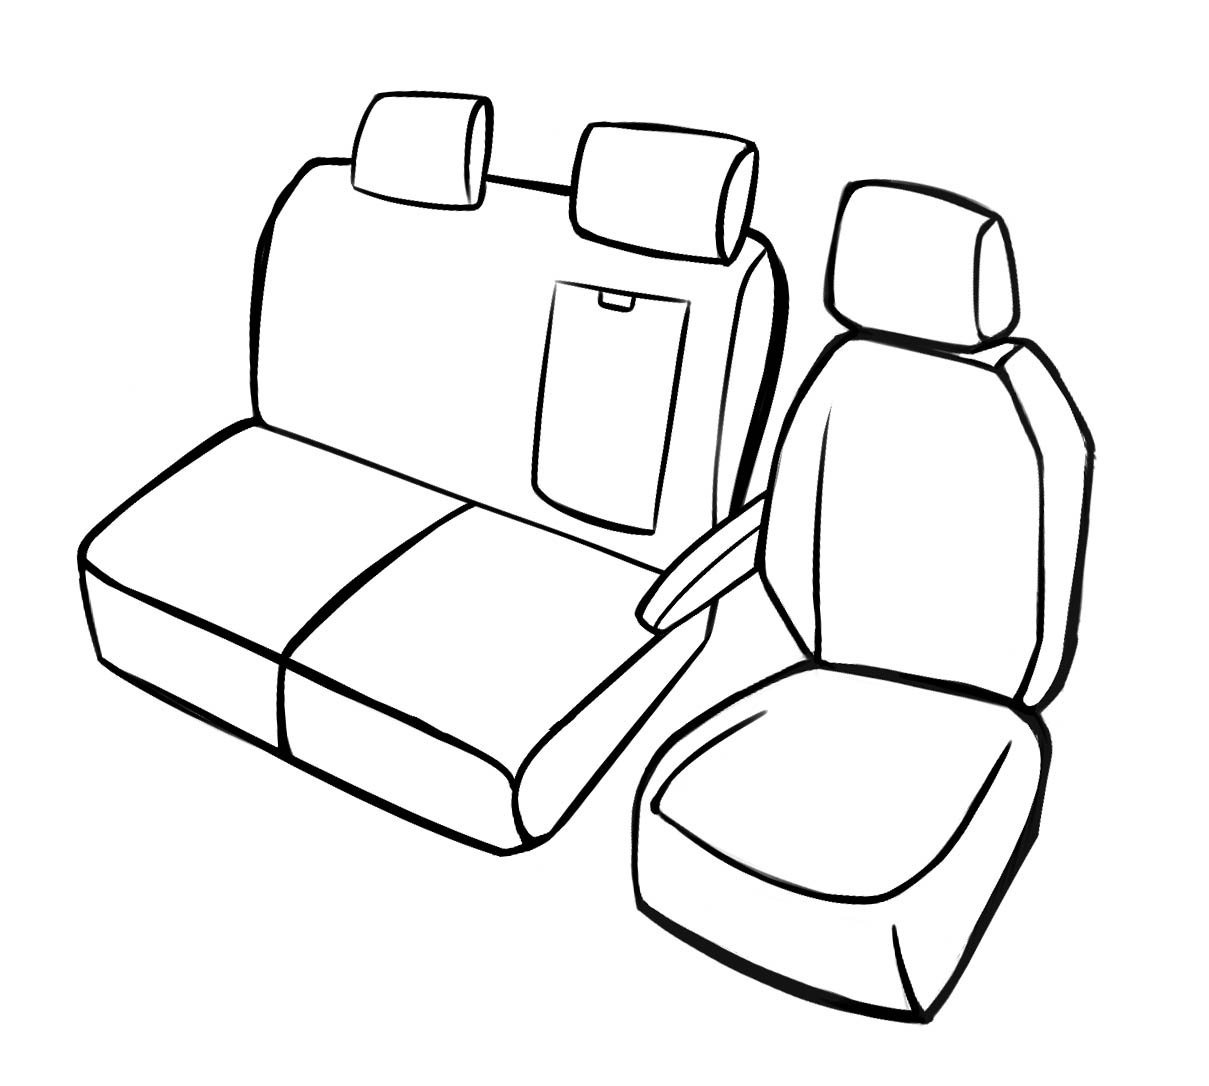 Premium Seat Cover for Citroen Jumpy 2016-Today, 1 single seat cover front + armrest cover, 1 double bench cover